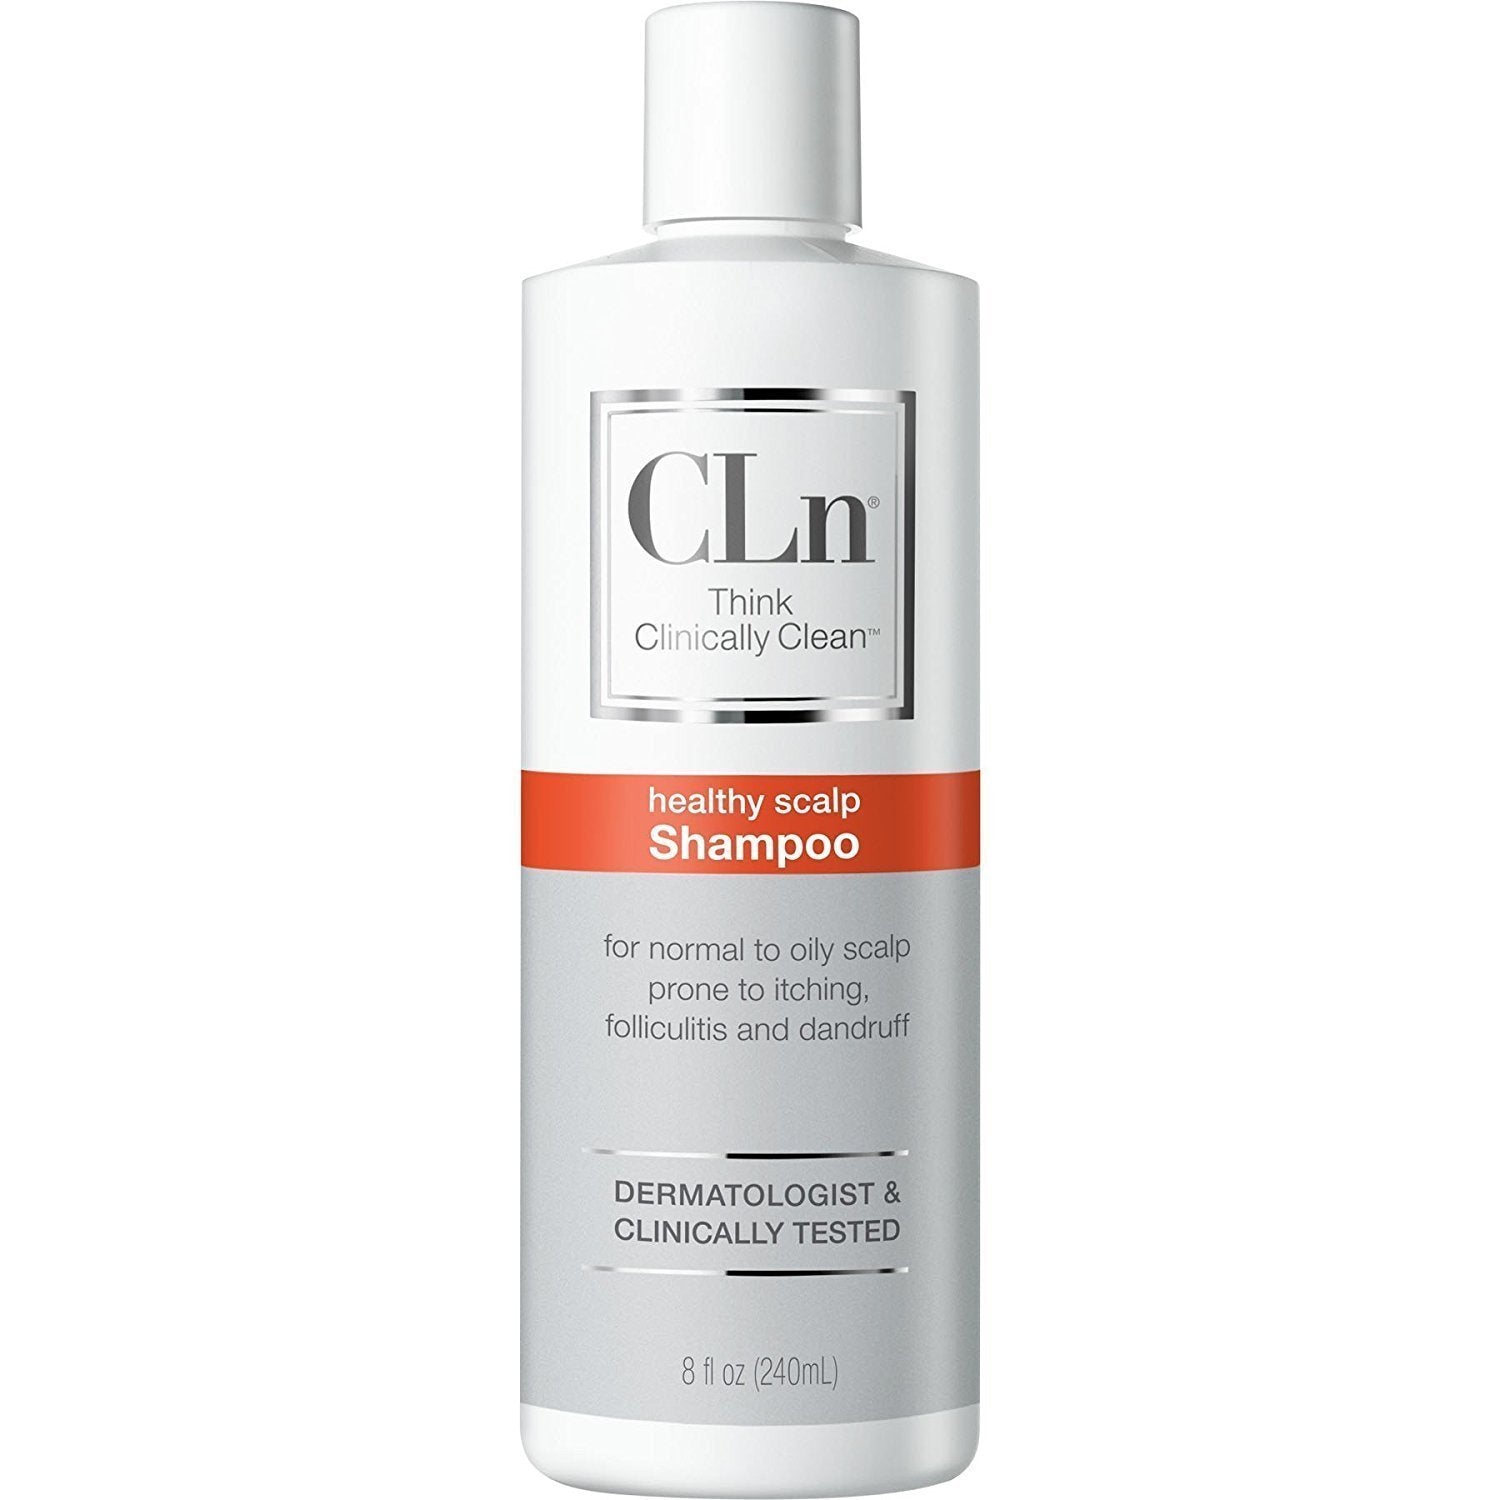 CLn® Shampoo - Clarifying Formula with Salicylic Acid to Remove Build Up, For Normal to Oily Scalp Prone to Folliculitis, Dandruff, Itchy & aky Scalp, Fragrance-Free & Paraben-Free, 8 .